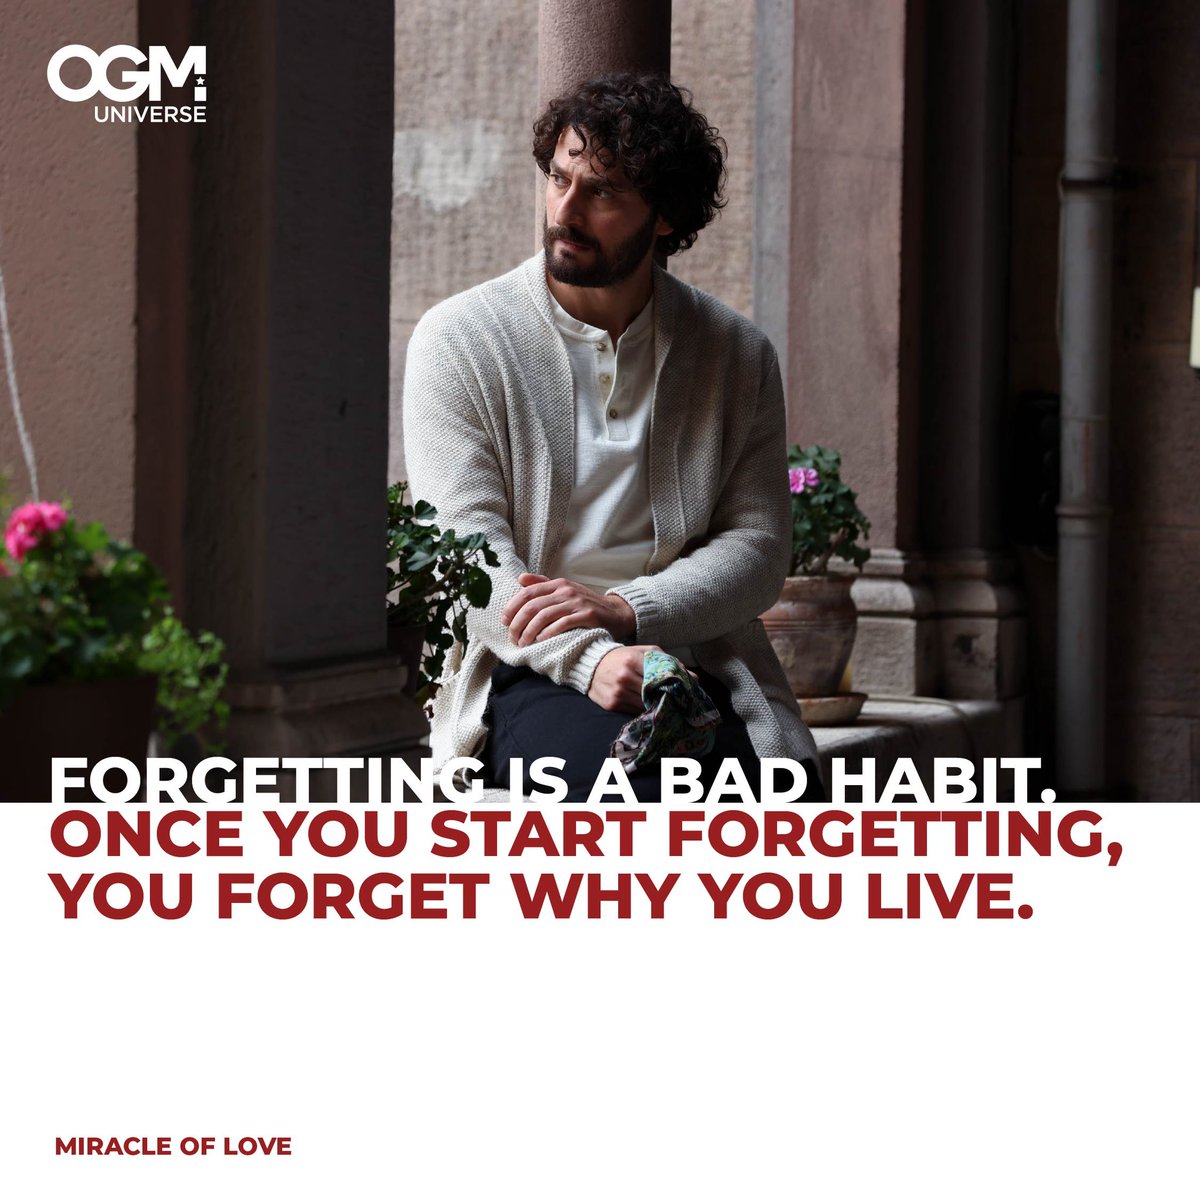 'Forgetting is a bad habit. Once you start forgetting, you forget why you live.'⁠ ⁠ #OGMUNIVERSE #MiracleOfLove